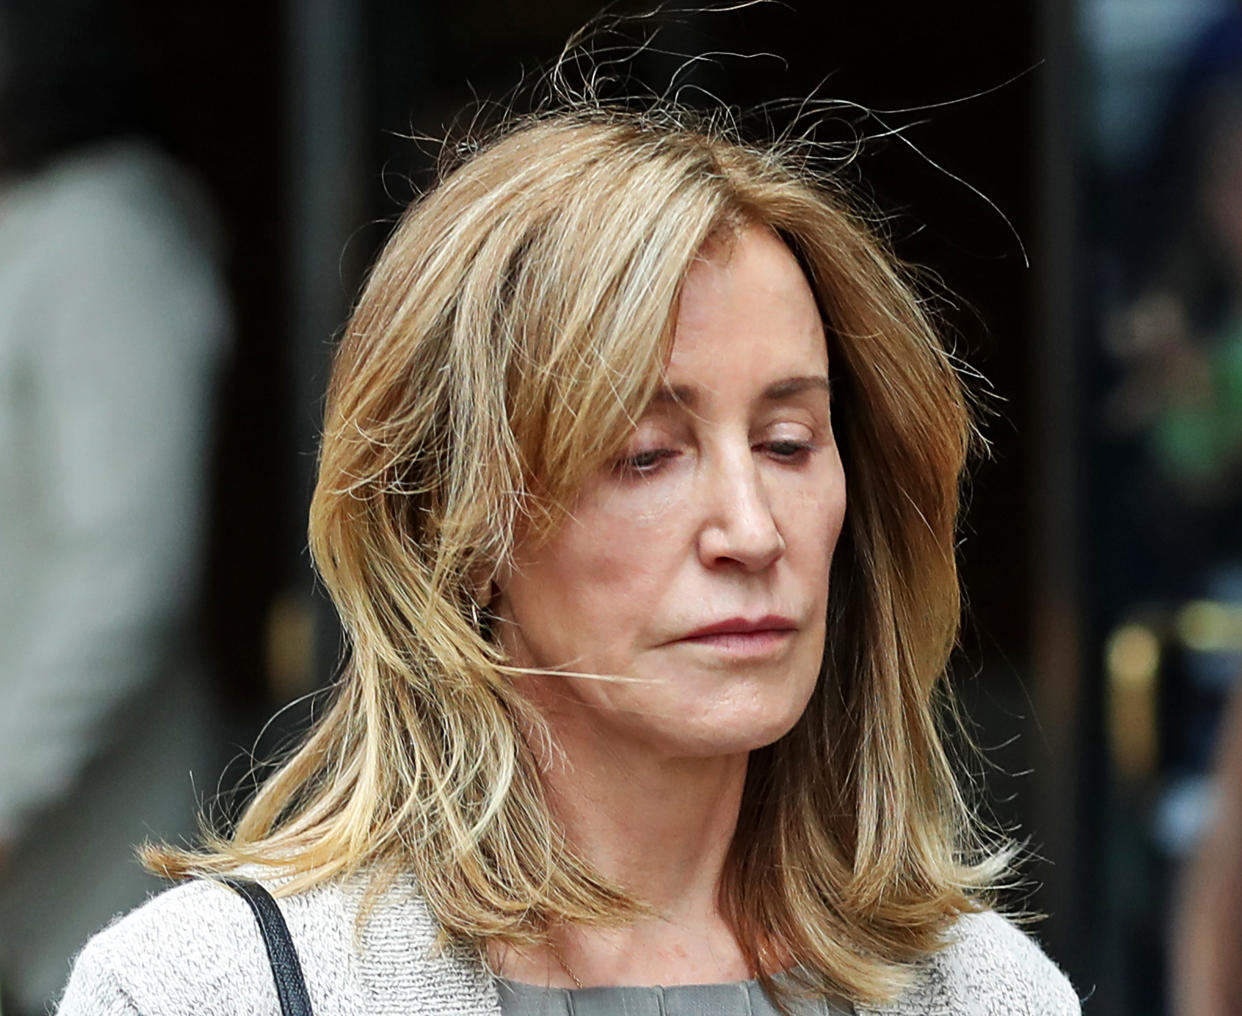 Actress Felicity Huffman leaves the John Joseph Moakley United States Courthouse in Boston on May 13, 2019. (Photo: David L. Ryan/The Boston Globe via Getty Images)